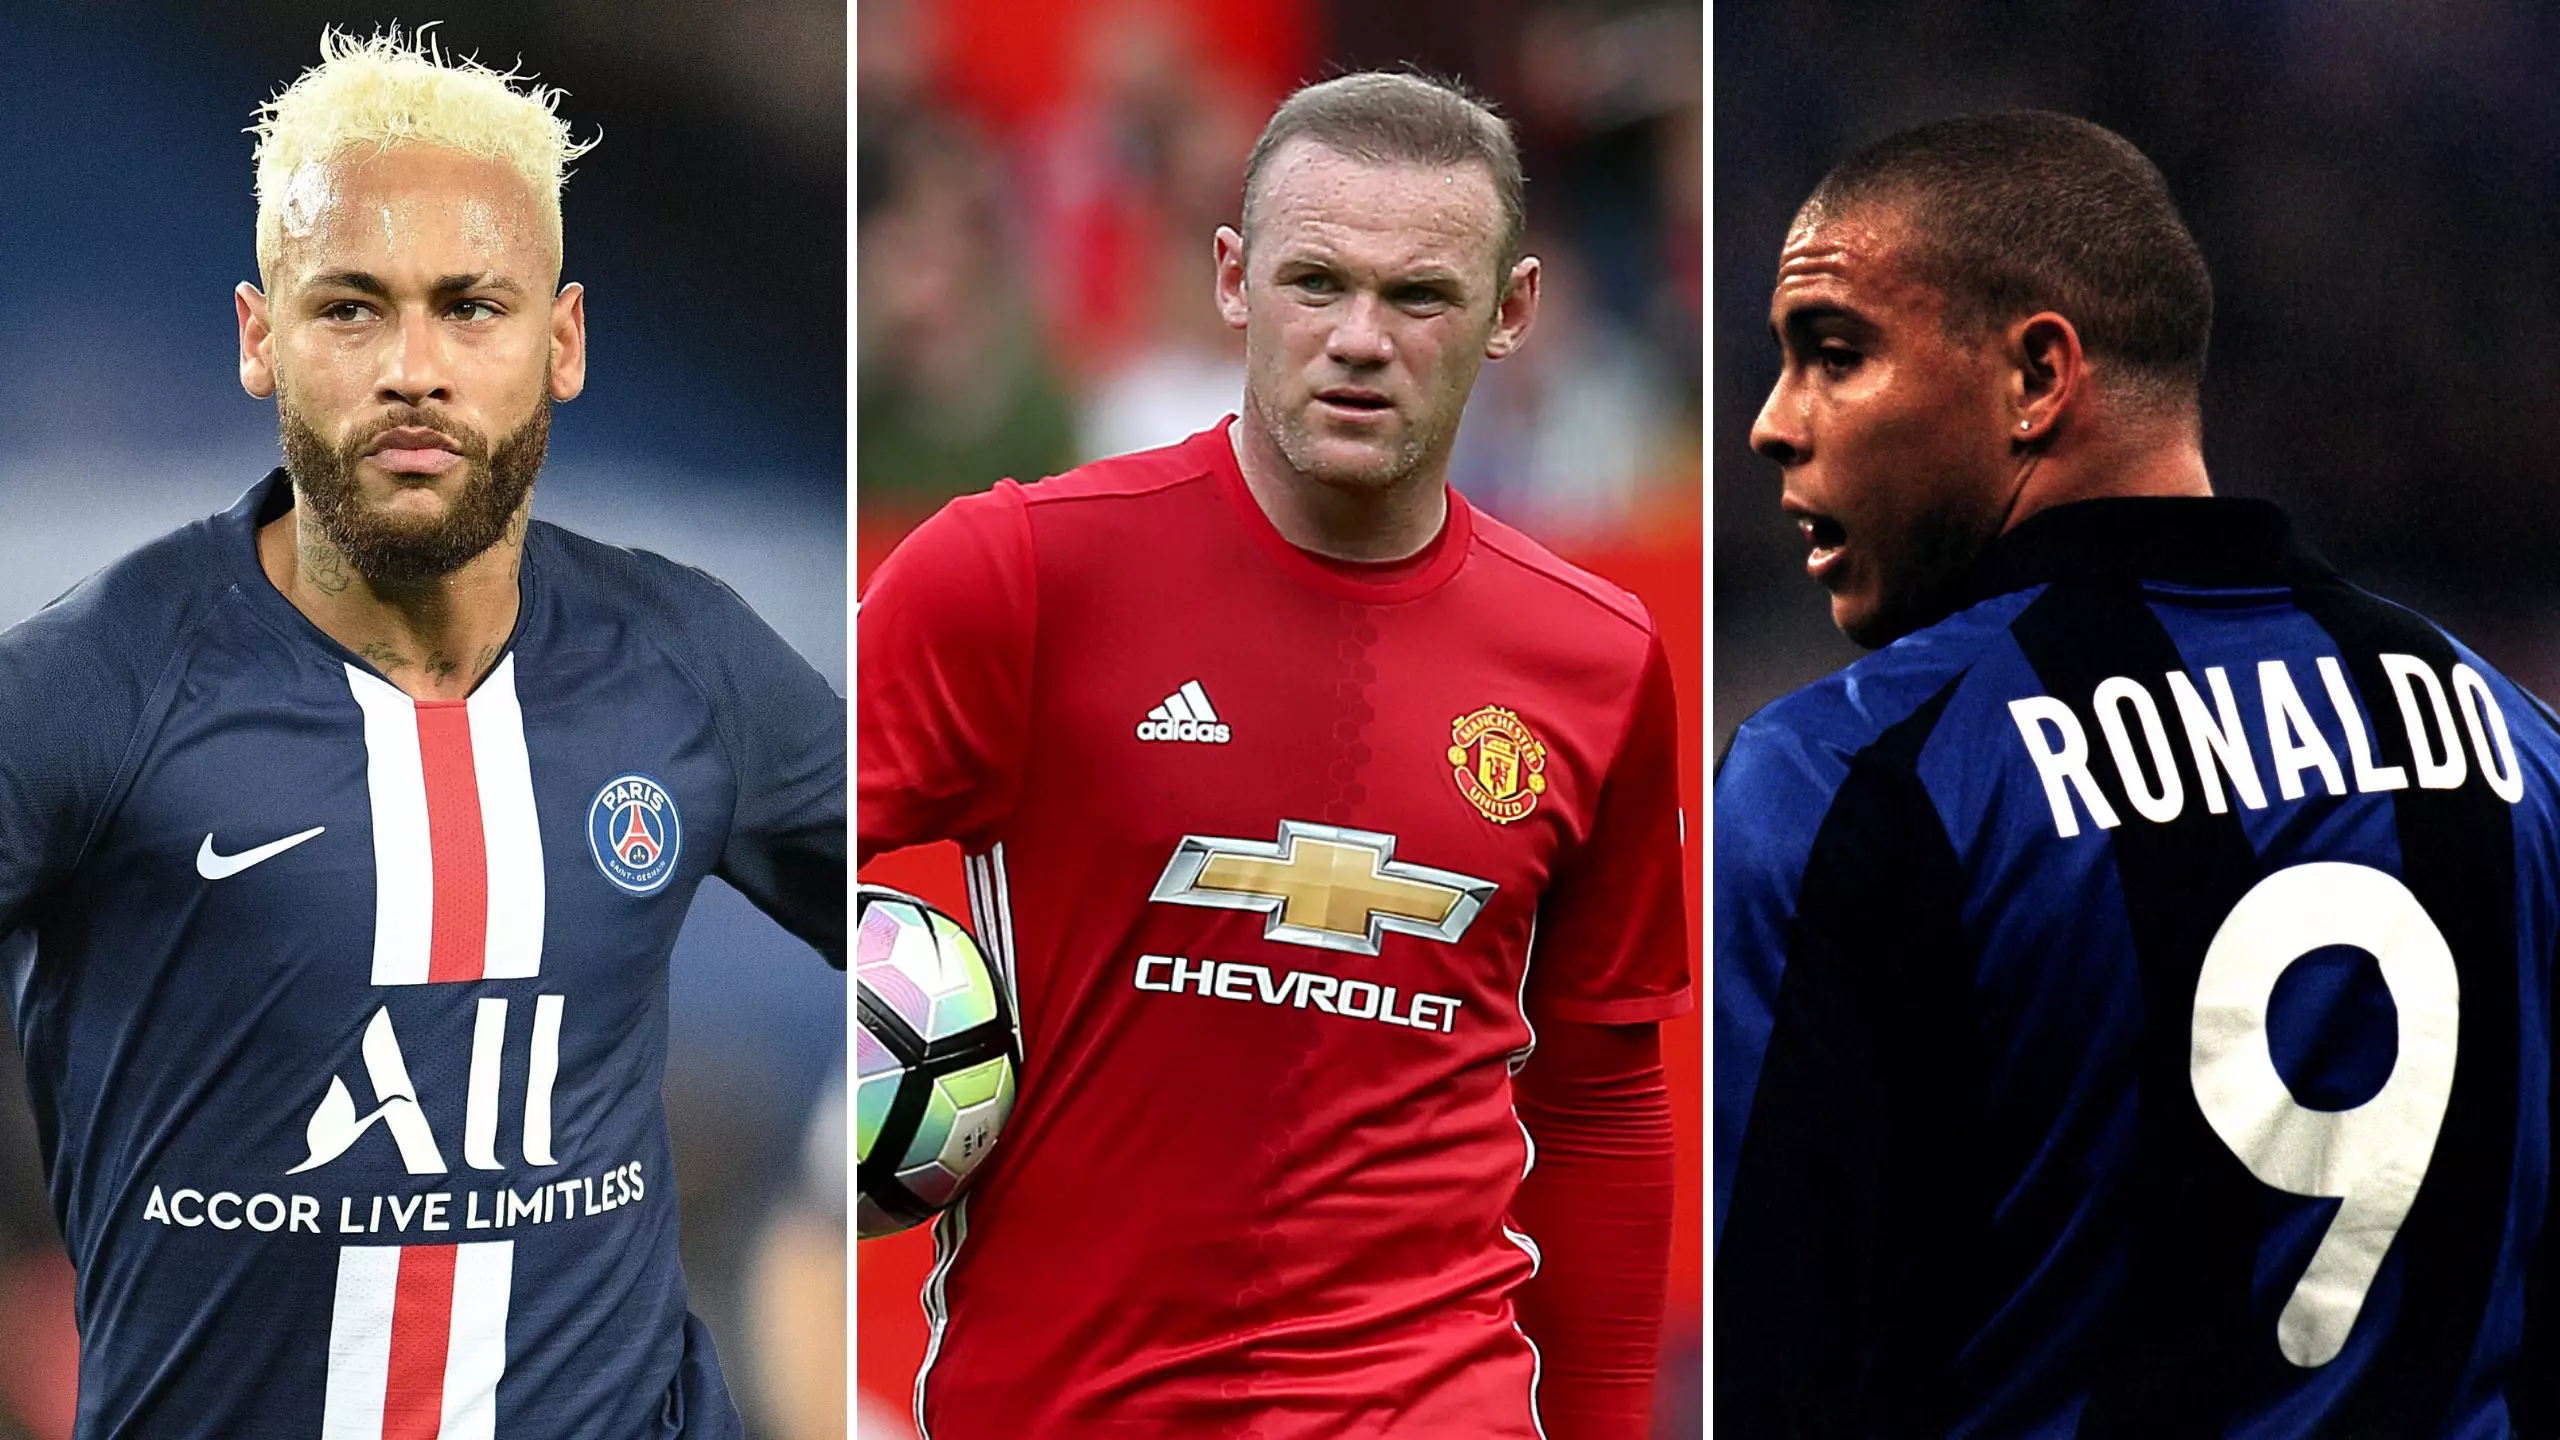 The Top Ten Highest Goalscorers At 21 For Club And Country Have Been Revealed